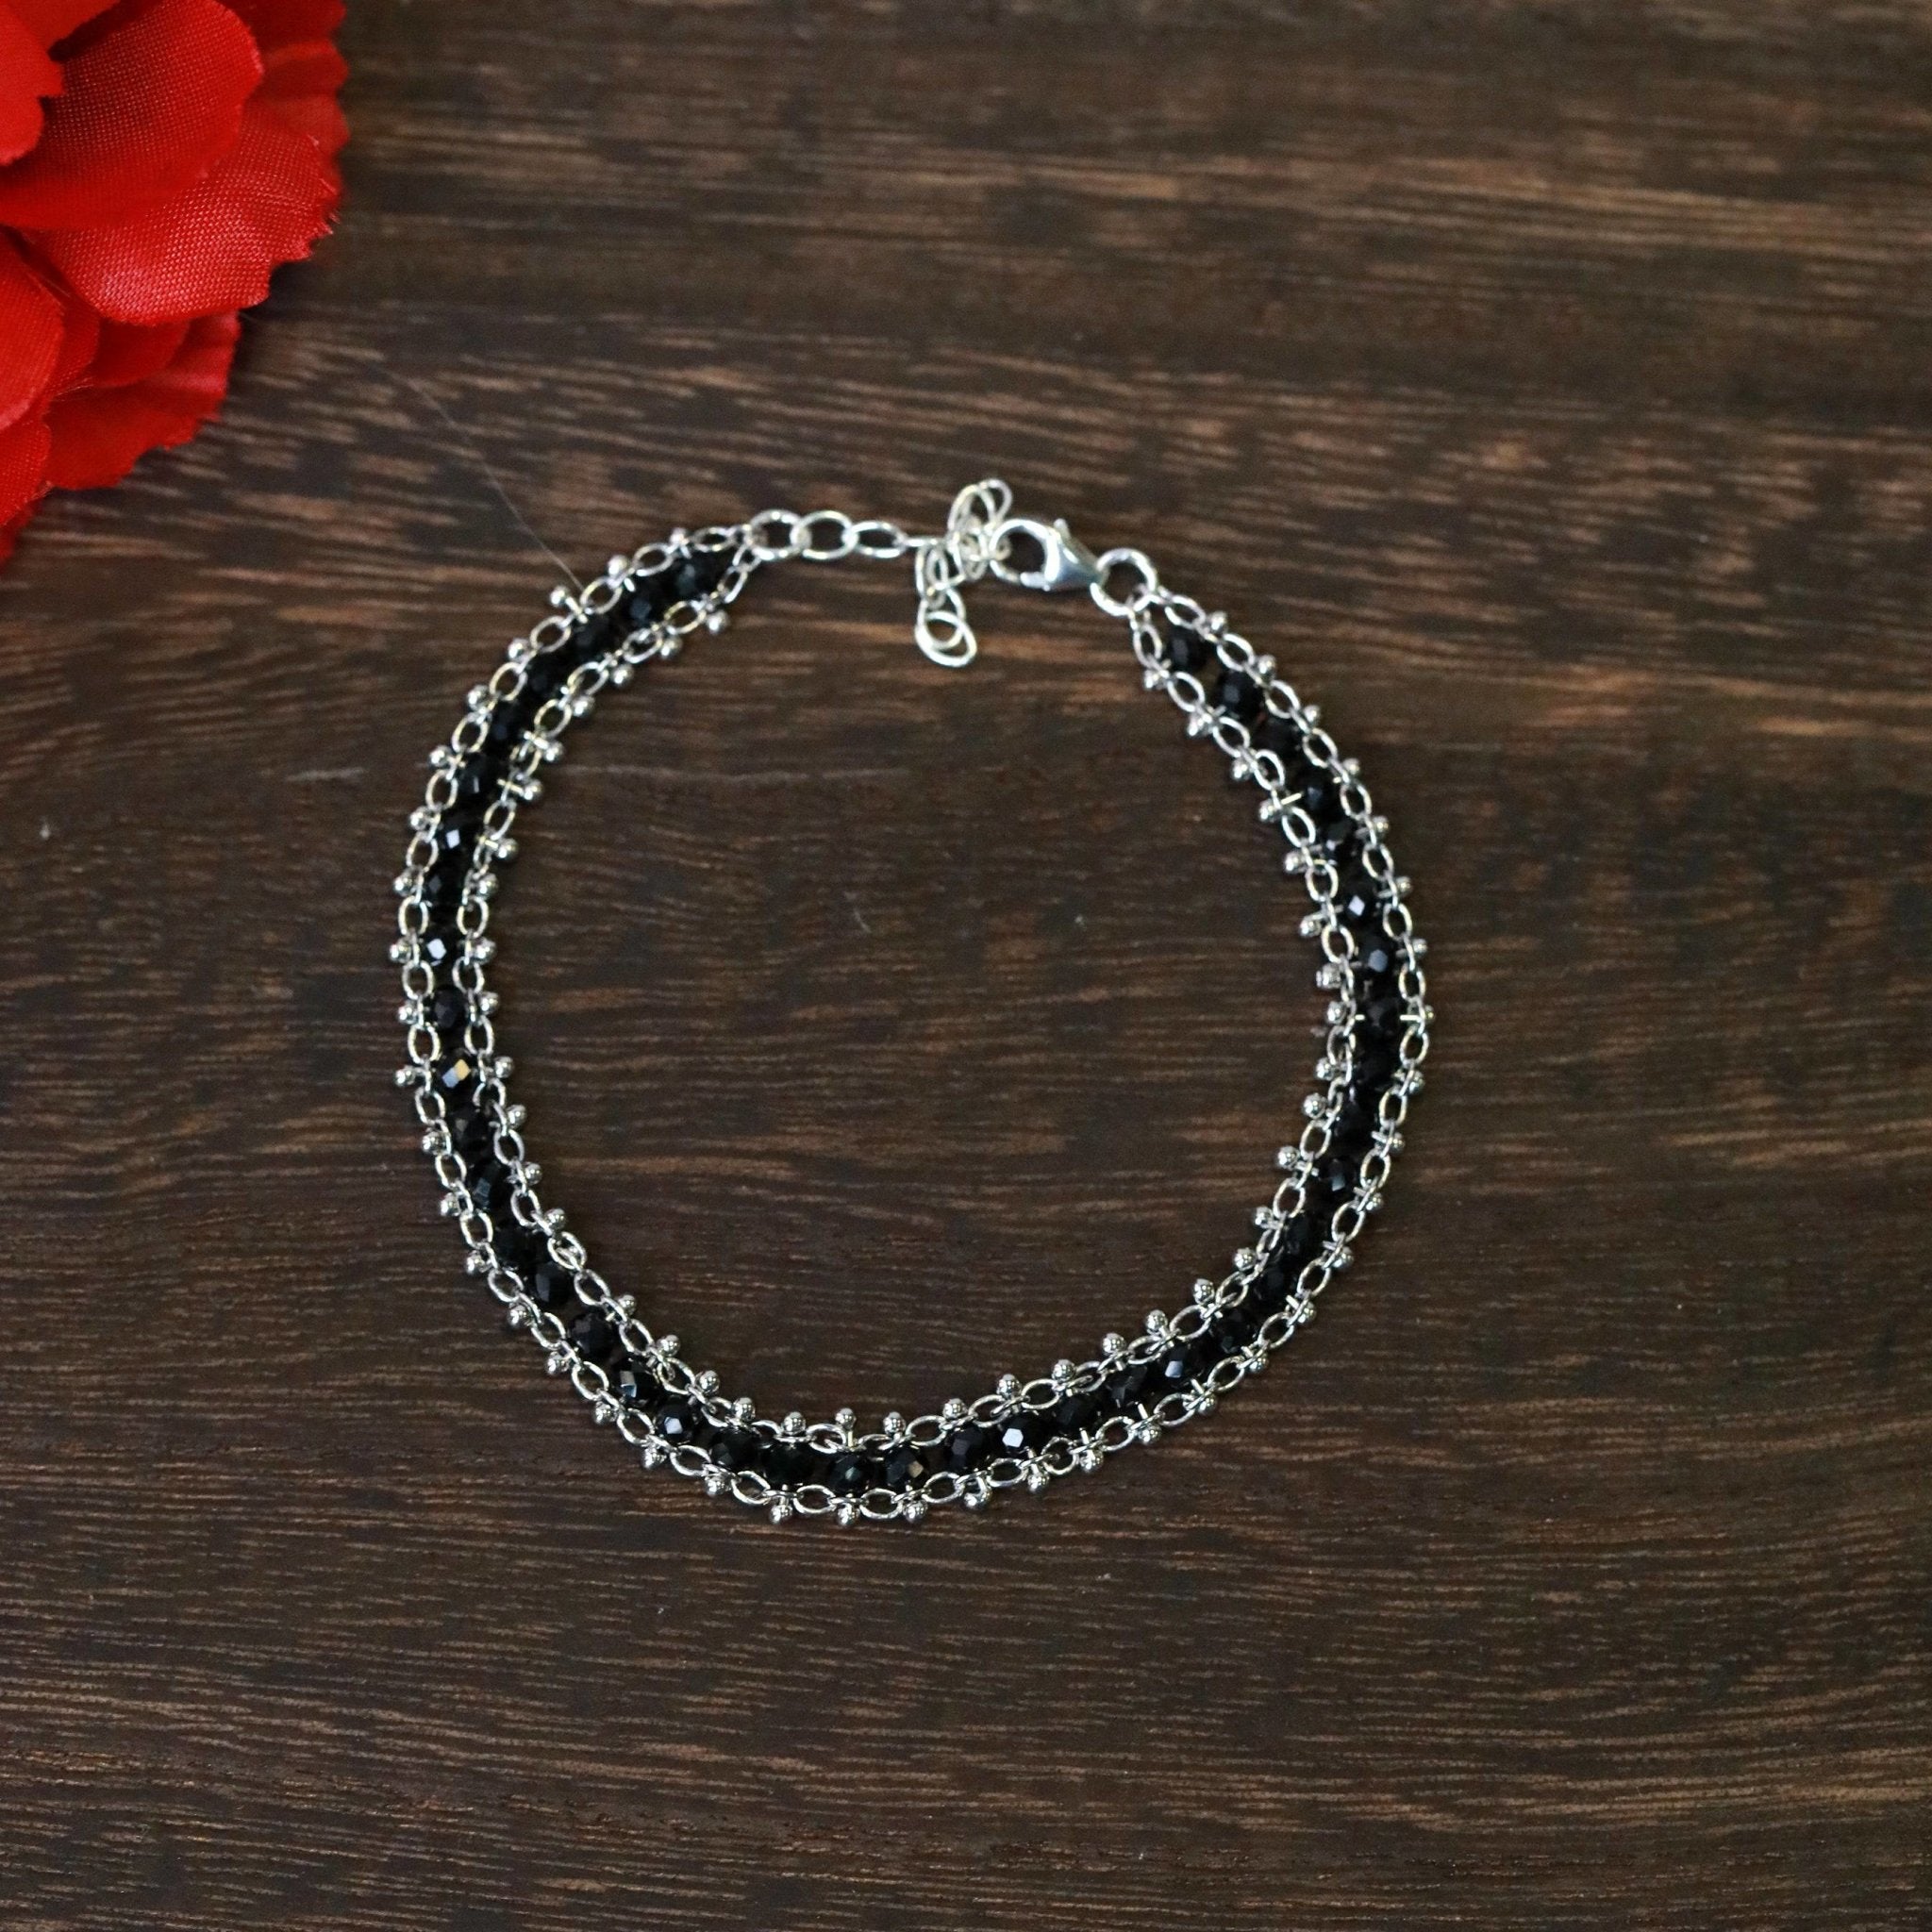 Halliwell Bracelet - Silver/Black - The Gilded Witch